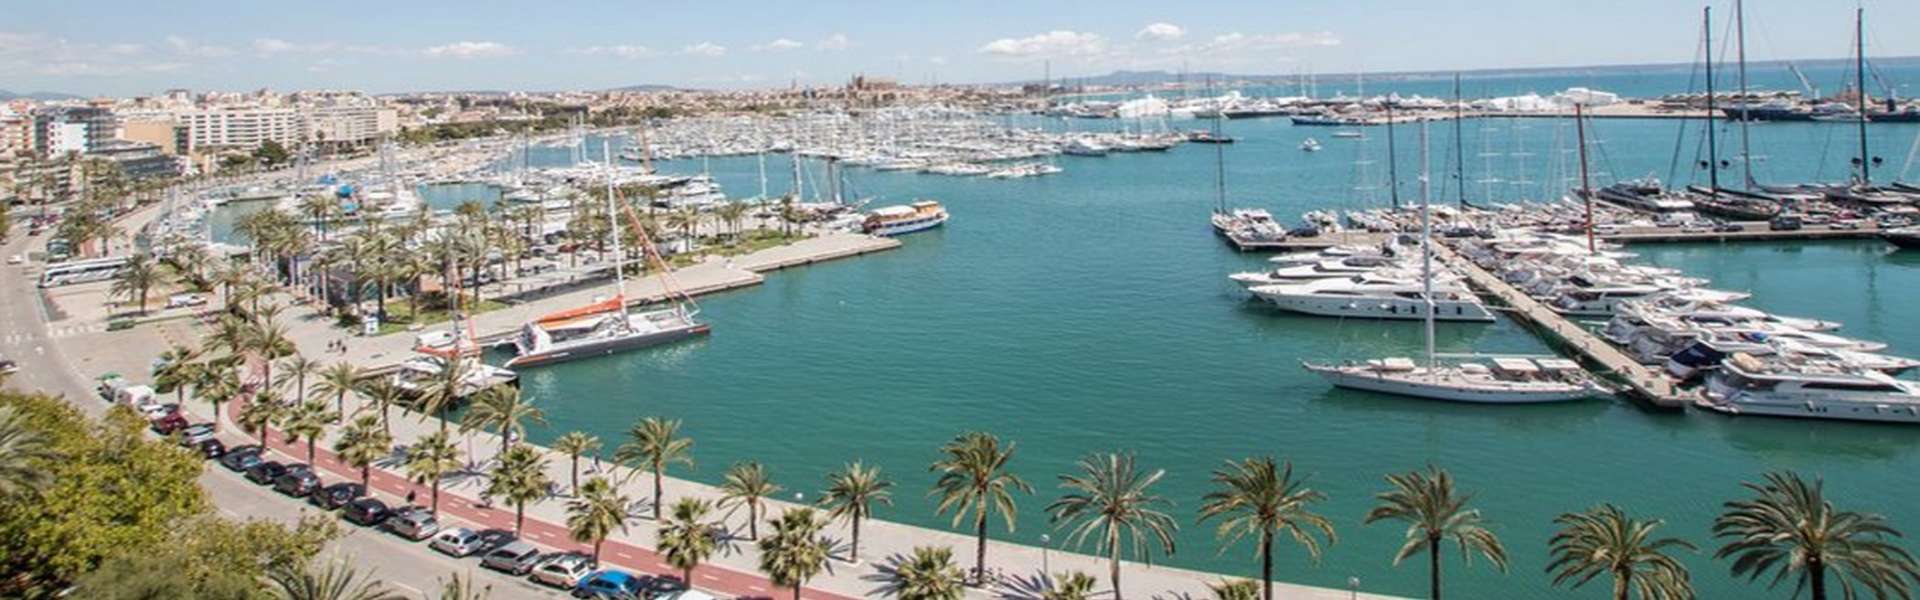 Palma/Paseo Marítimo - Exklusives Apartment in erster Meereslinie